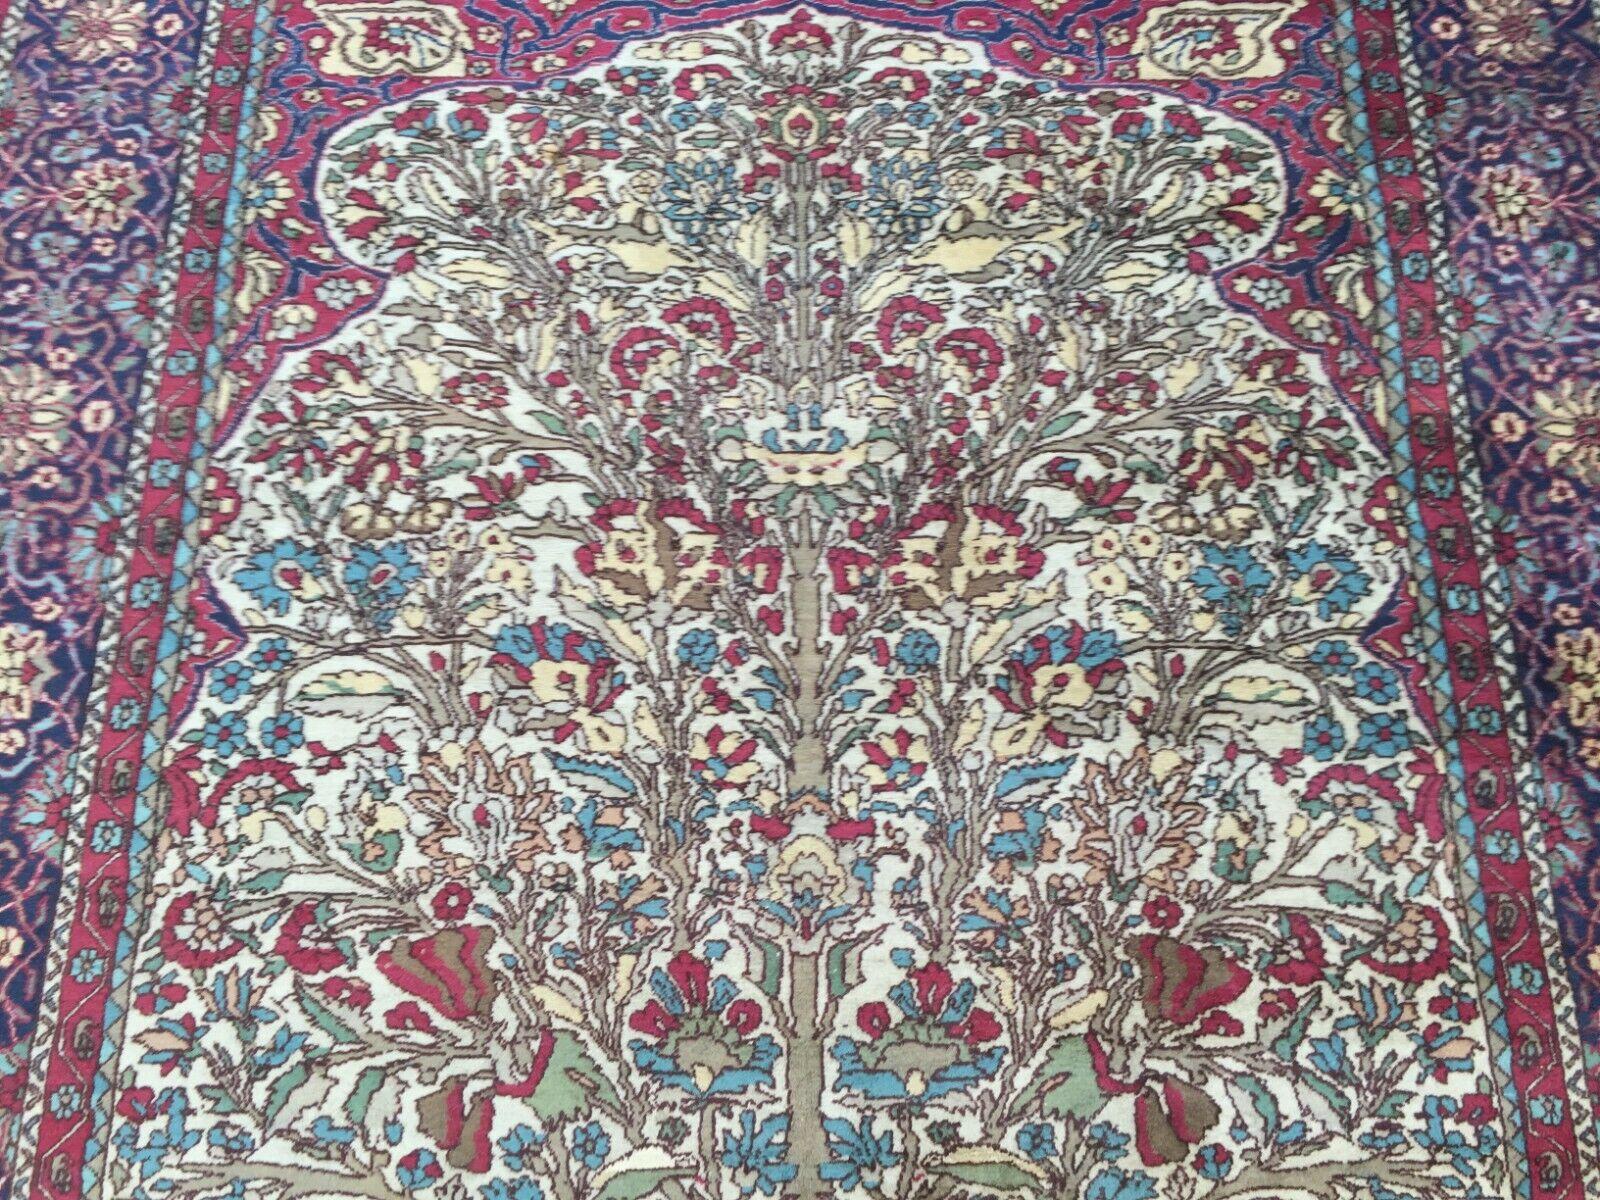 Handmade Antique Persian Style Kerman Rug 4.2' x 6', 1920s - 1W12 In Good Condition For Sale In Bordeaux, FR